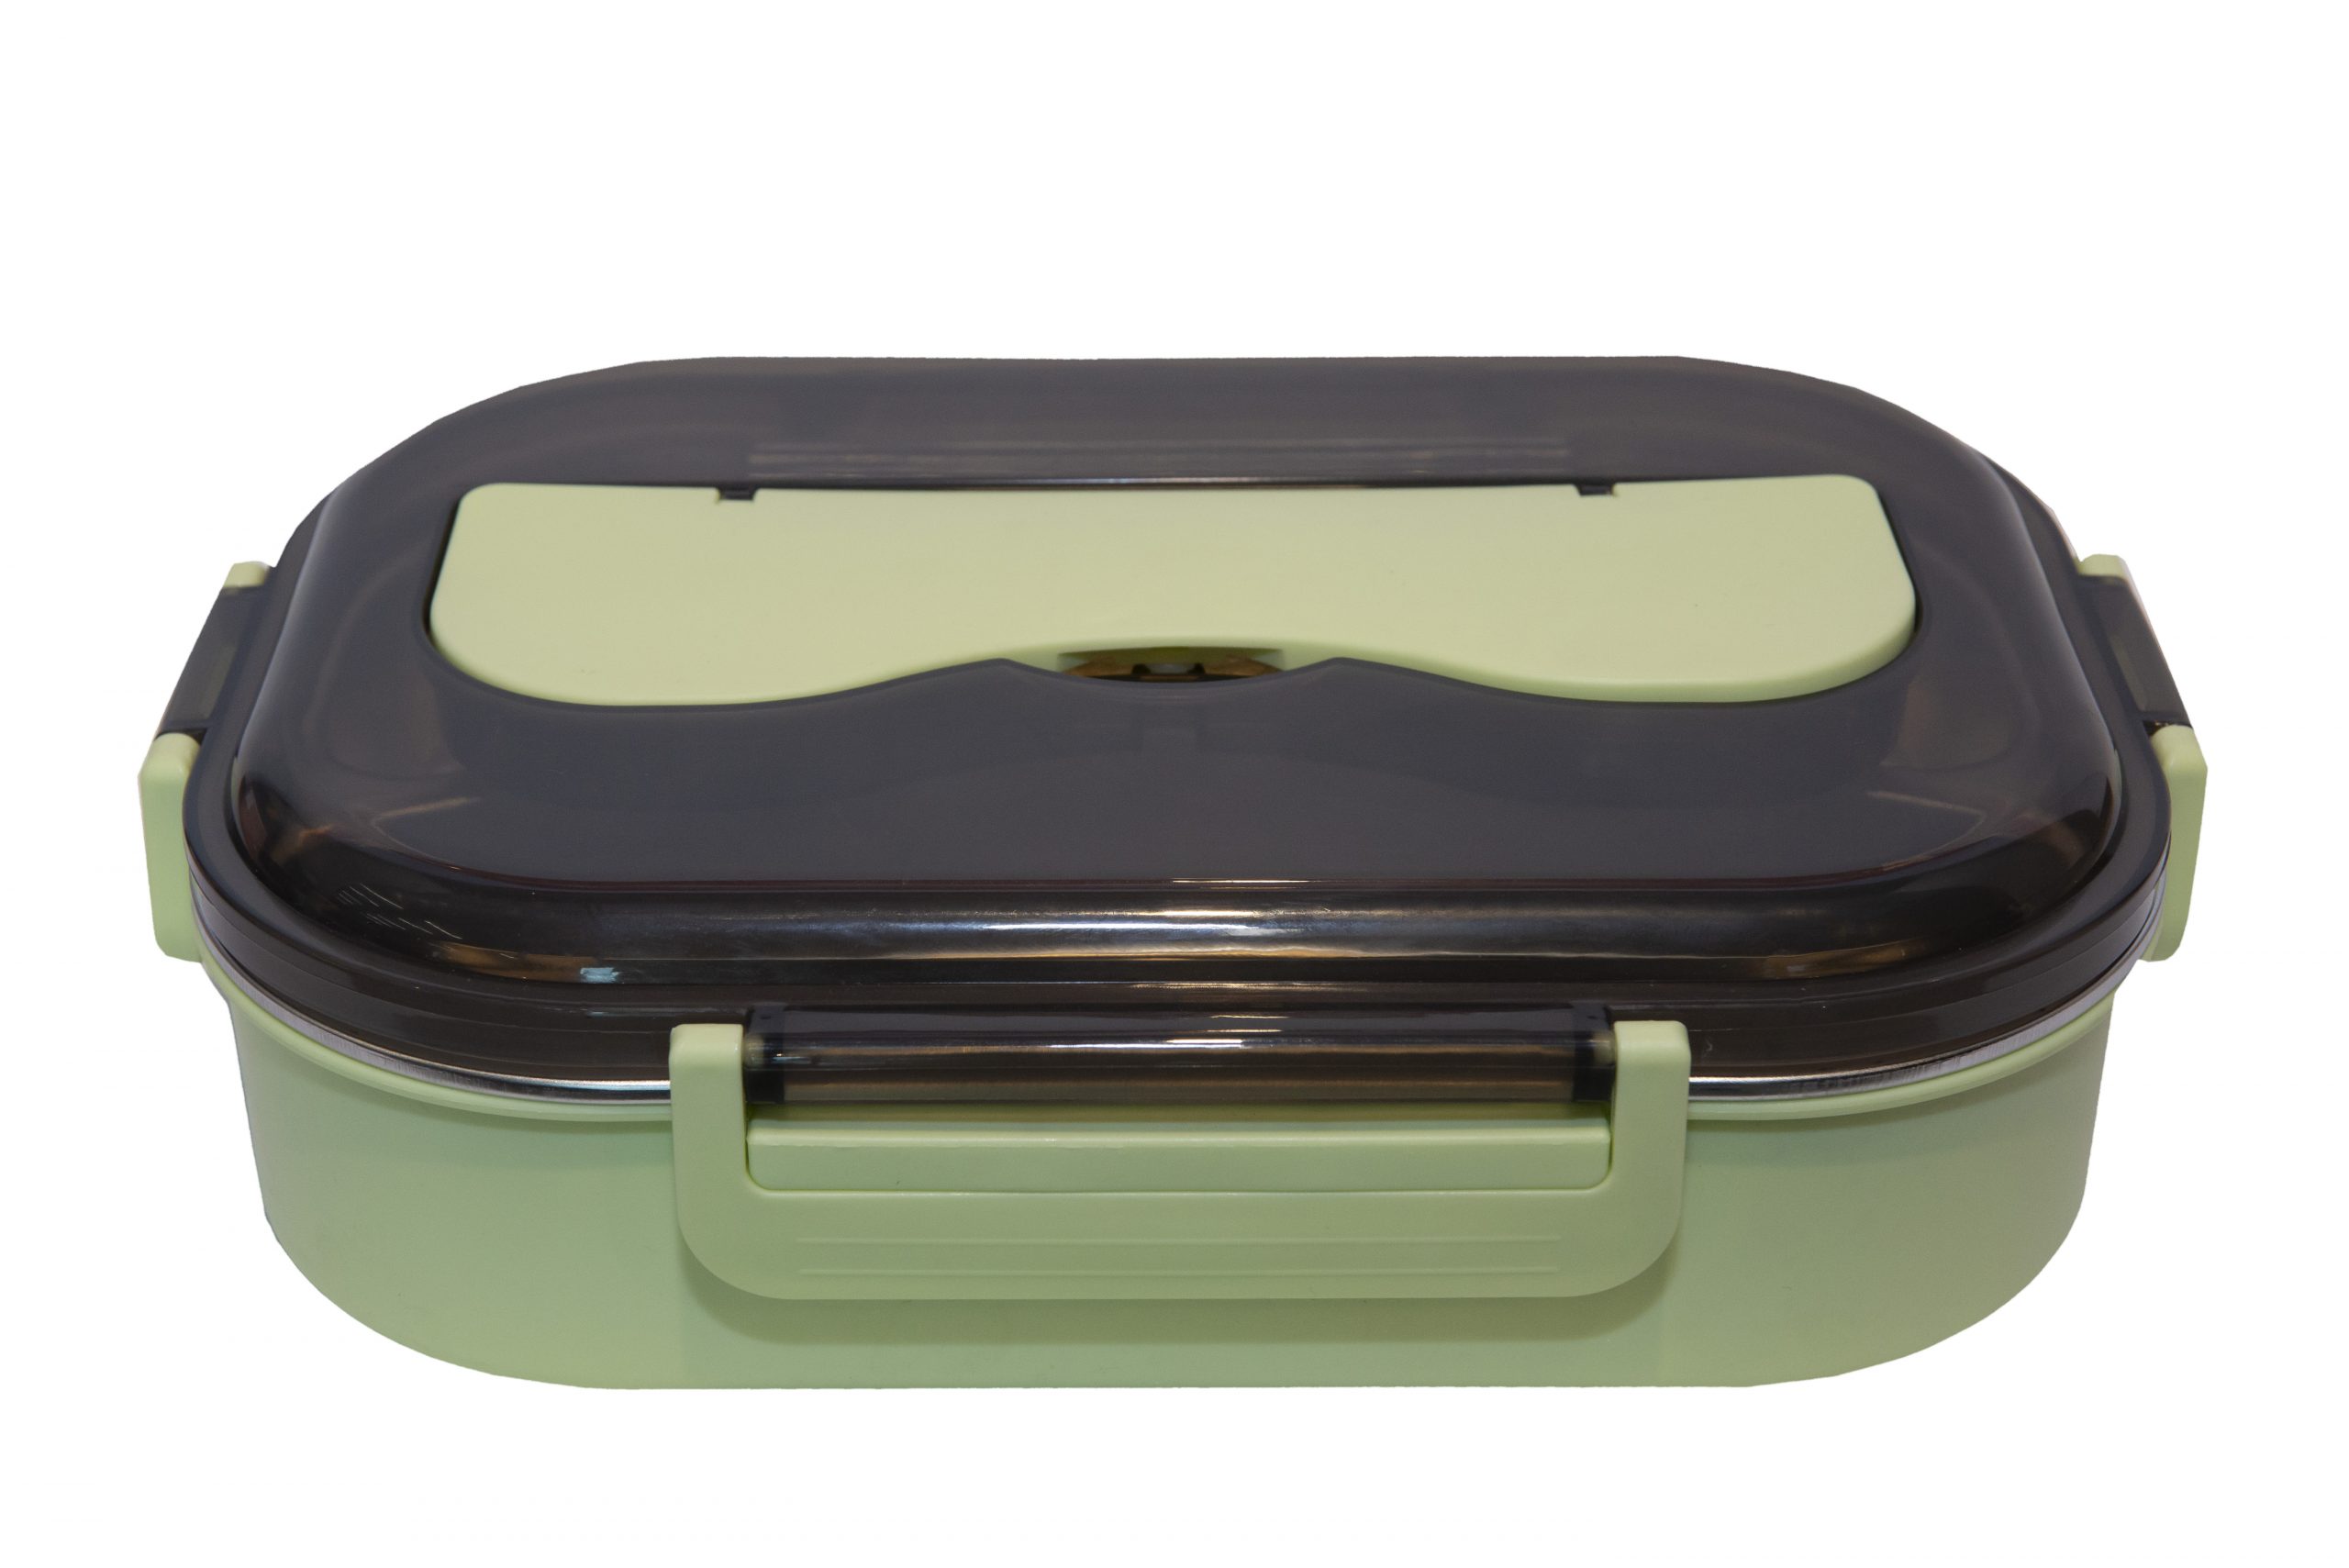 Stainless Steel Lunch Box Printing Singapore_CE5013_Lime Green